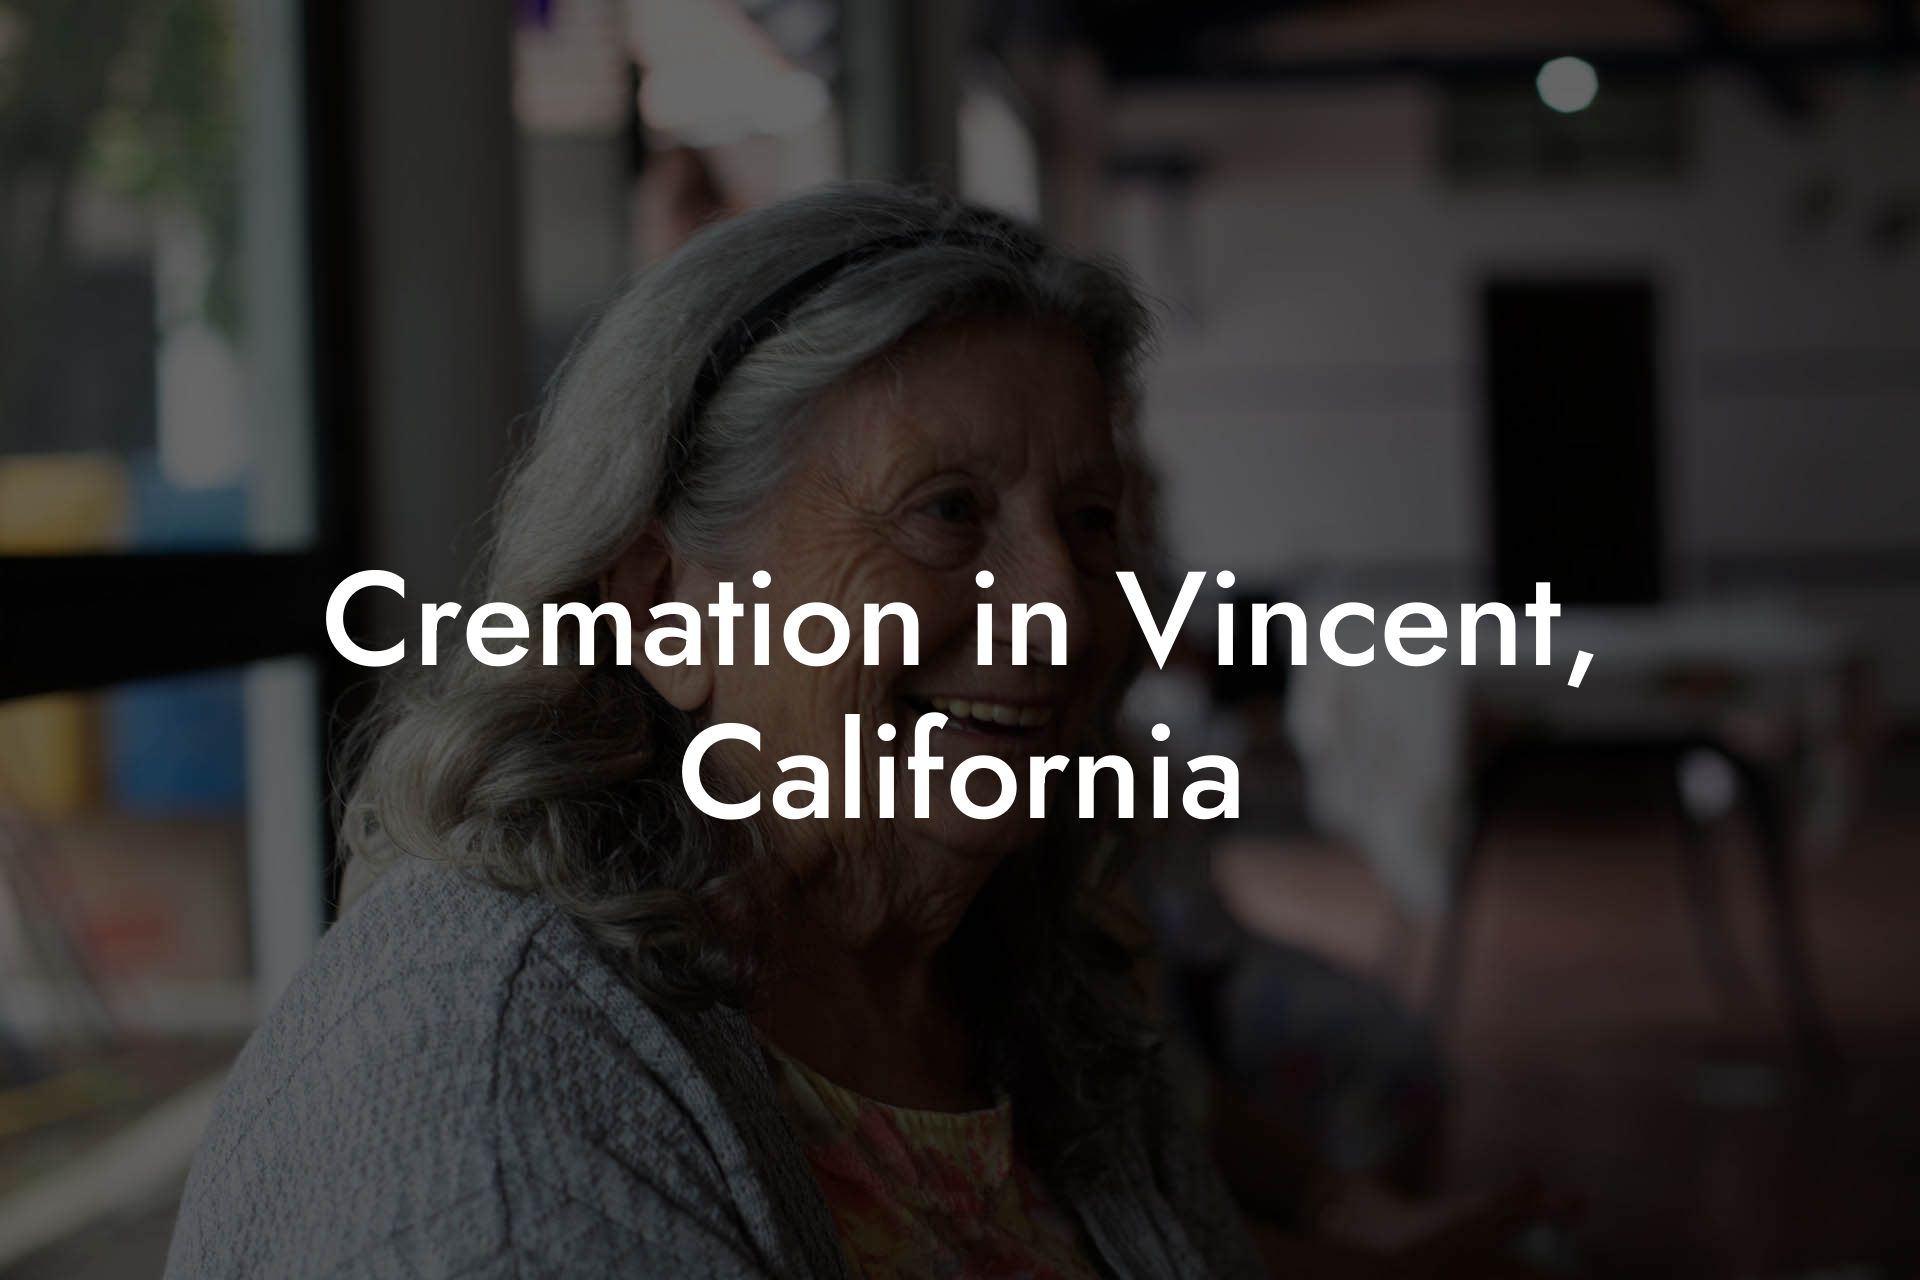 Cremation in Vincent, California